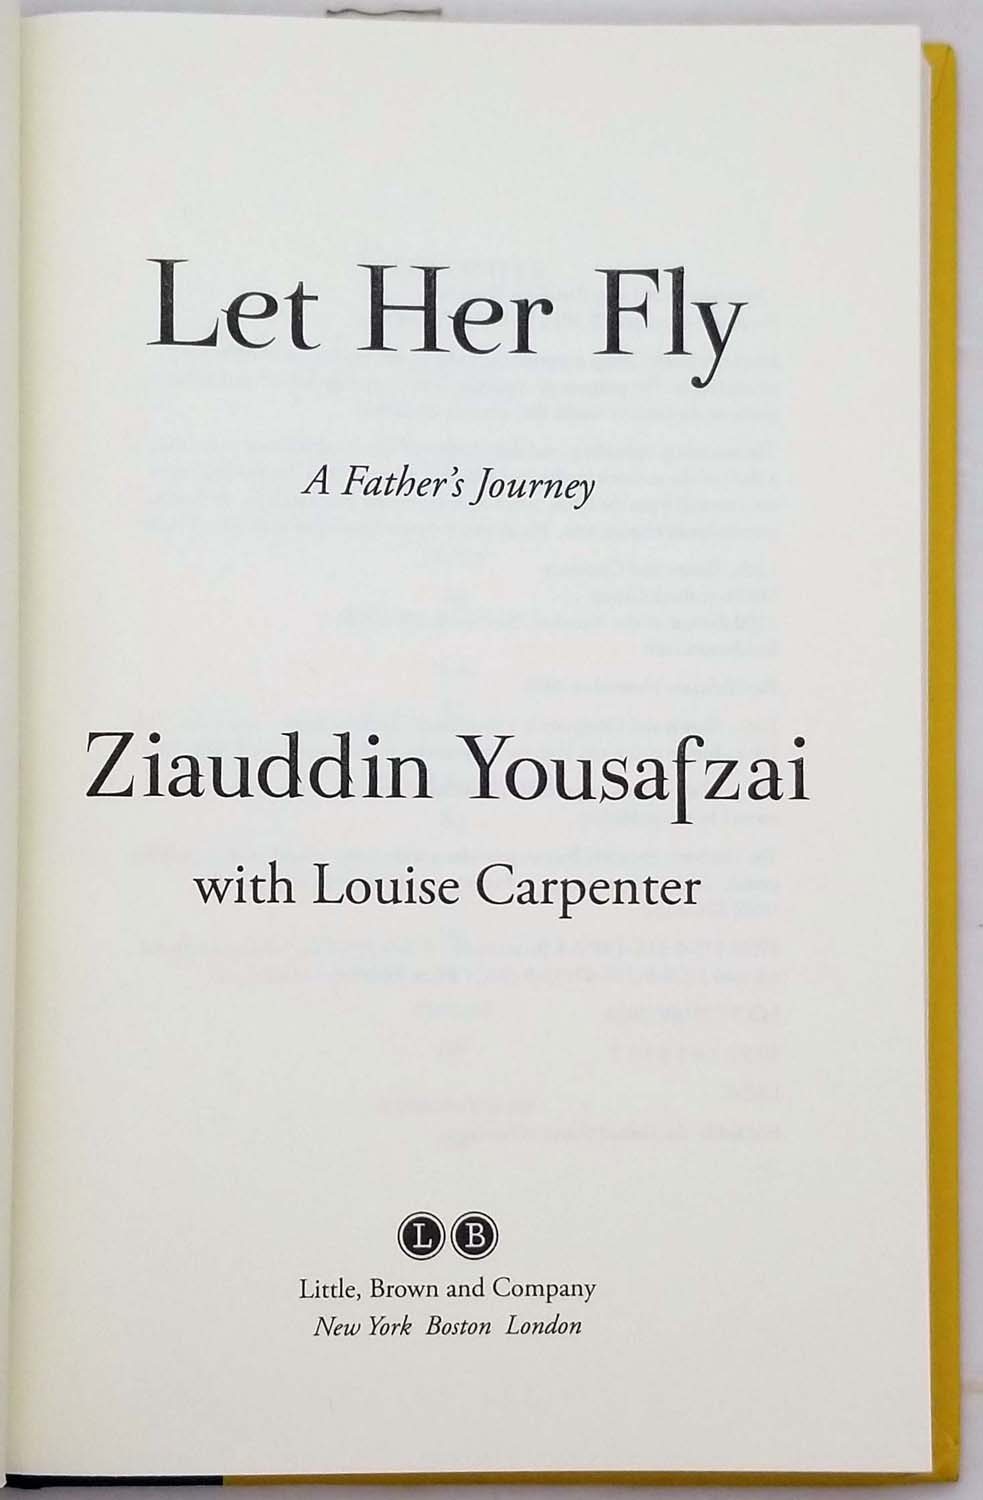 Let Her Fly: A Father's Journey - Ziauddin Yousafzai 2018 | 1st Edition SIGNED